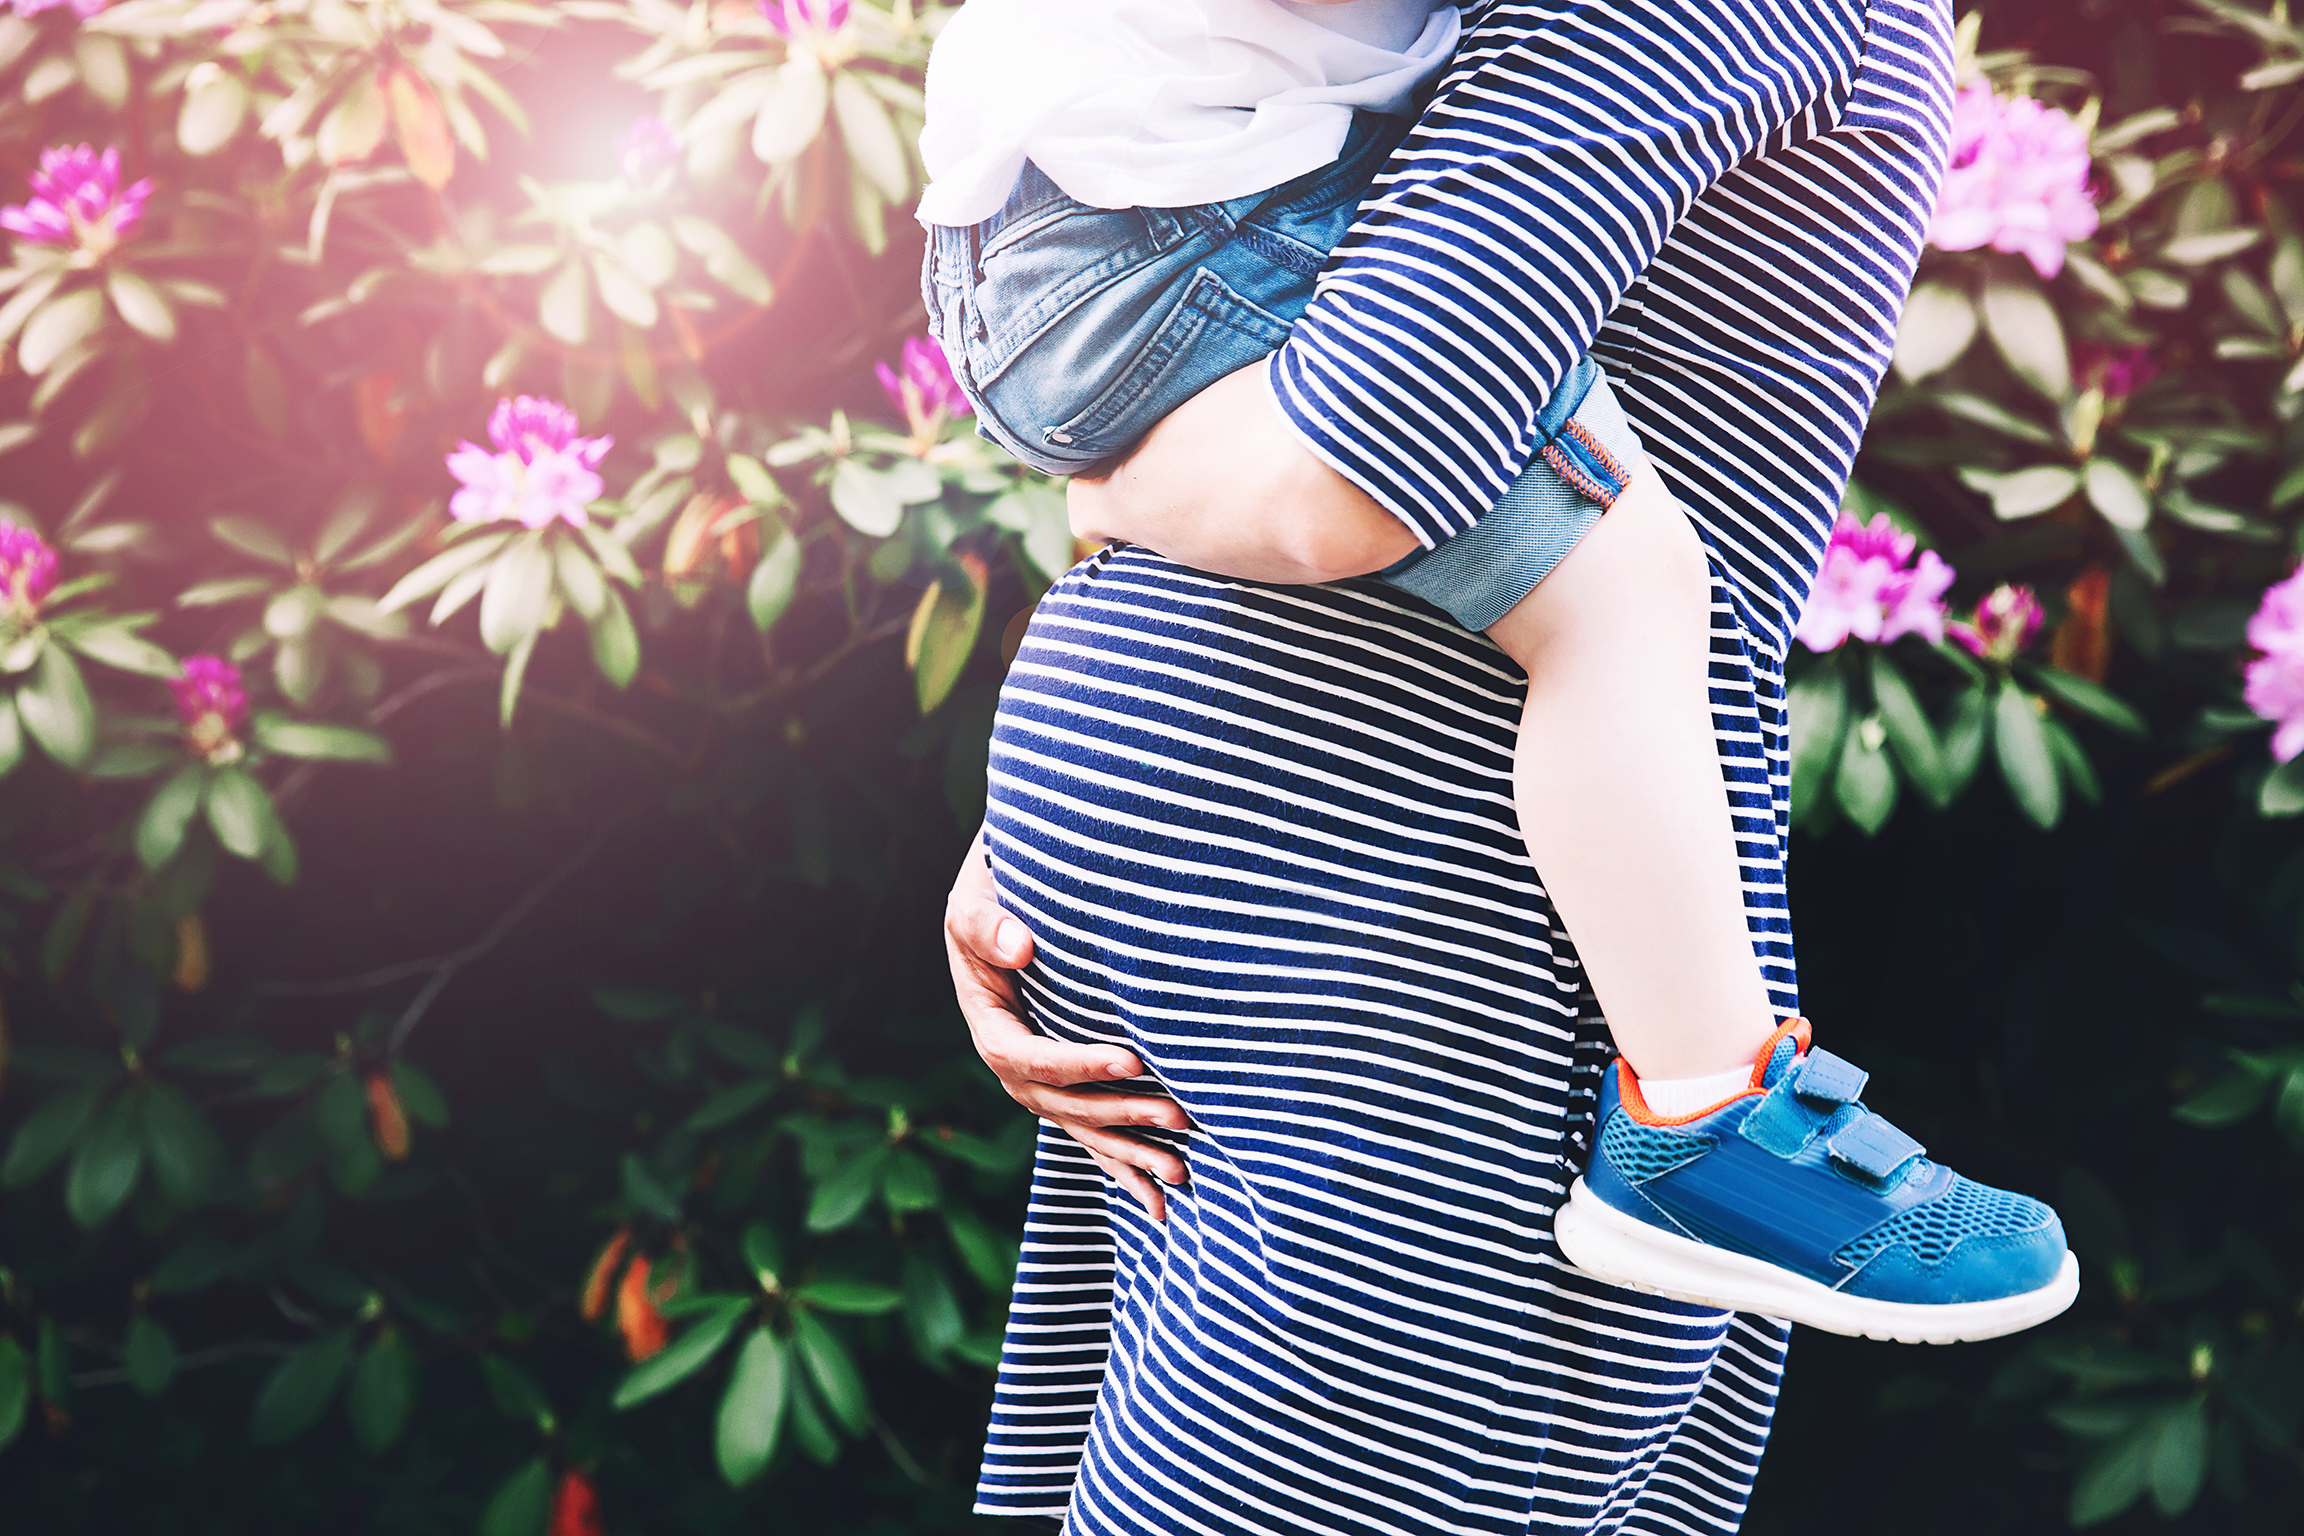 Pregnant woman with child. Mother and son on nature background, close-up. Child boy is sitting on belly of his mother, who pregnant for second time. Pregnancy, new life, family, parenthood concept.